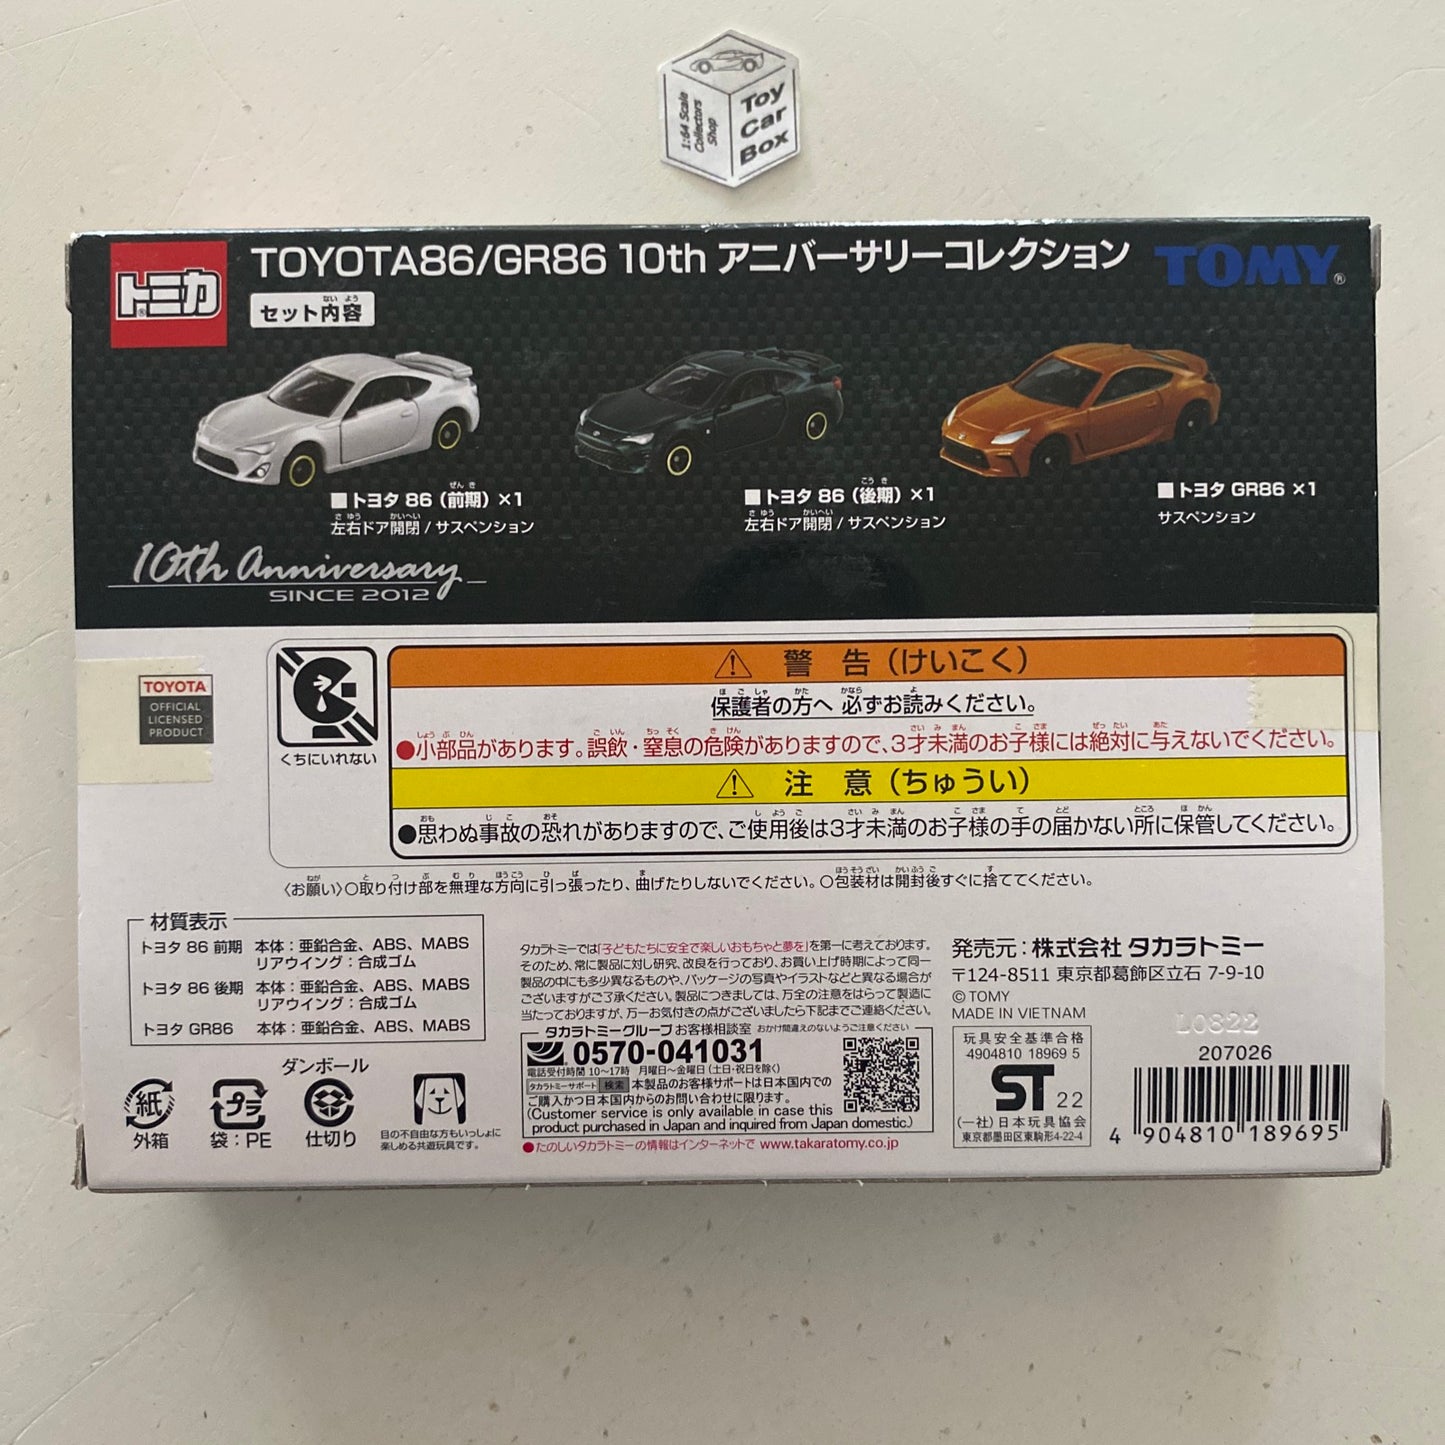 TOMICA Toyota GT86 / GT86 10th Anniversary Collection (3 Car Set) O90